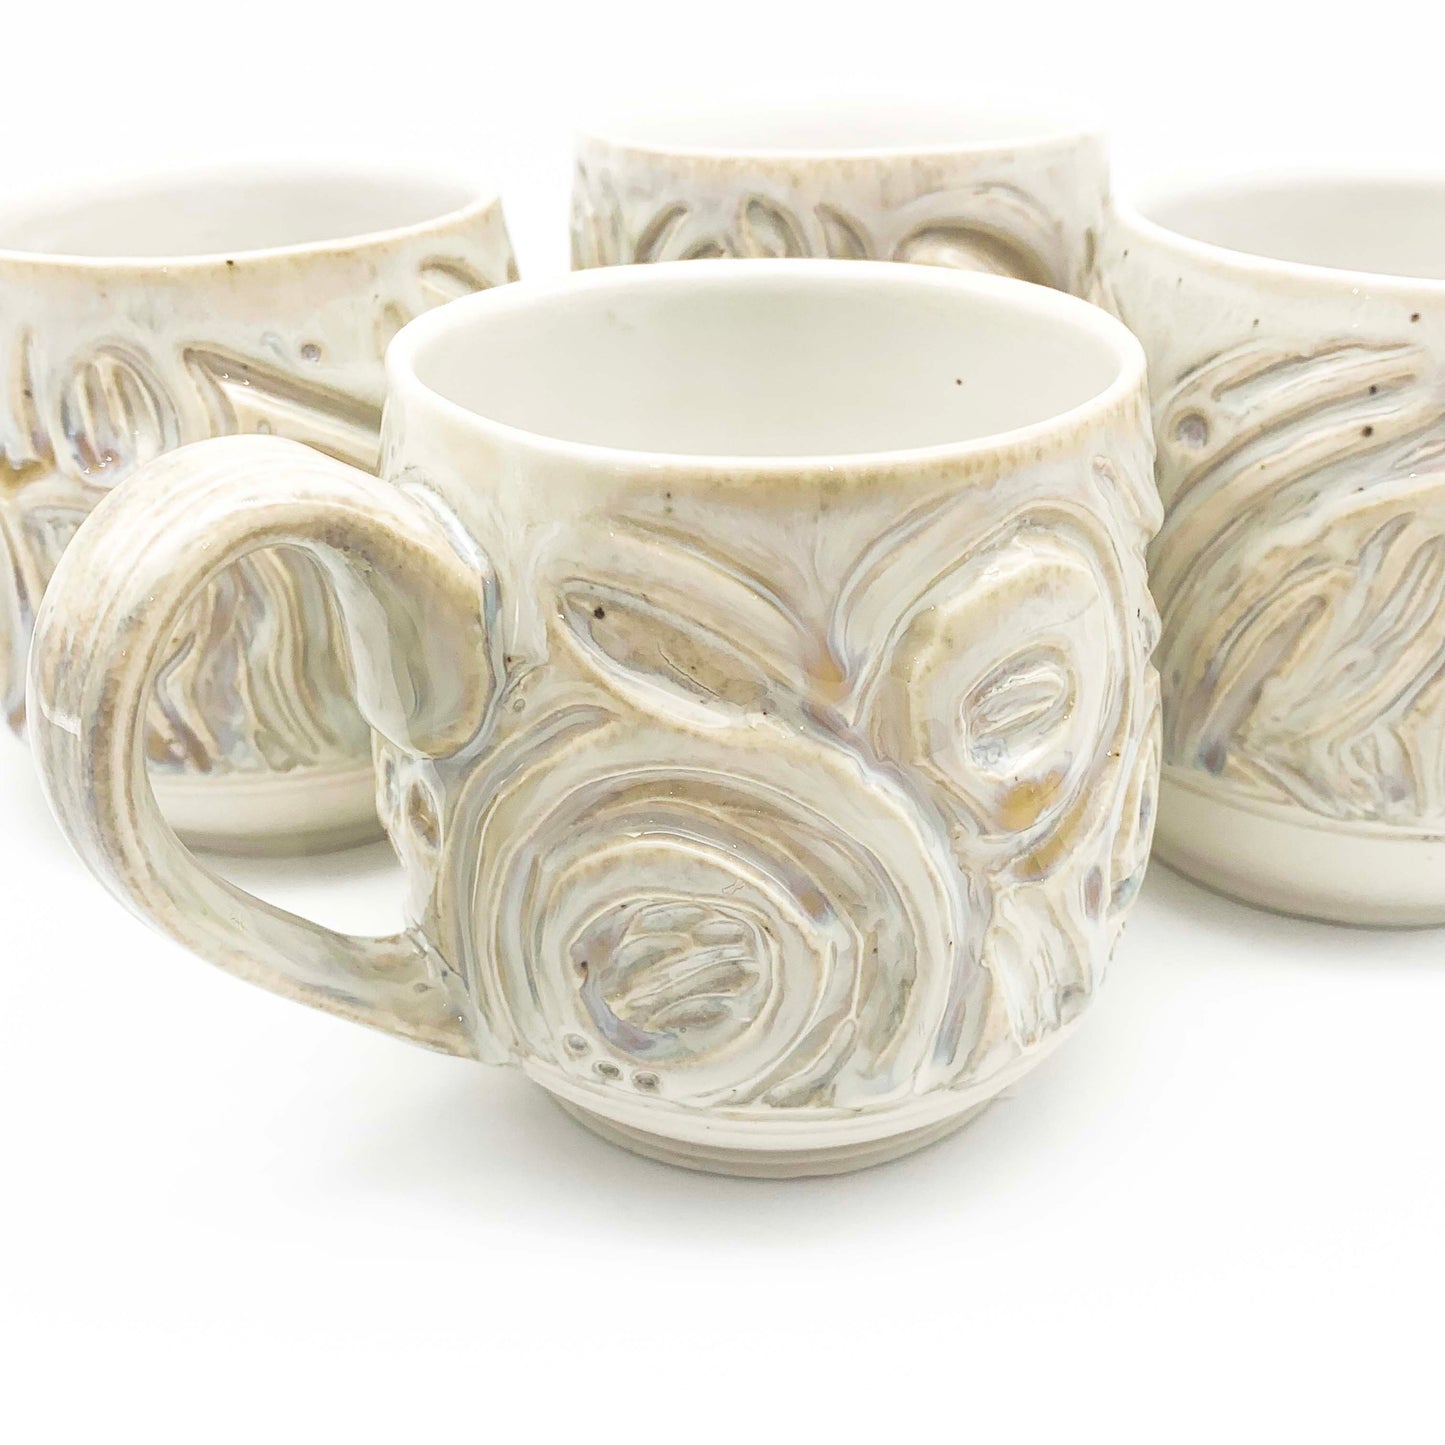 A Drink Well Collection : Iridescent Carved Mug